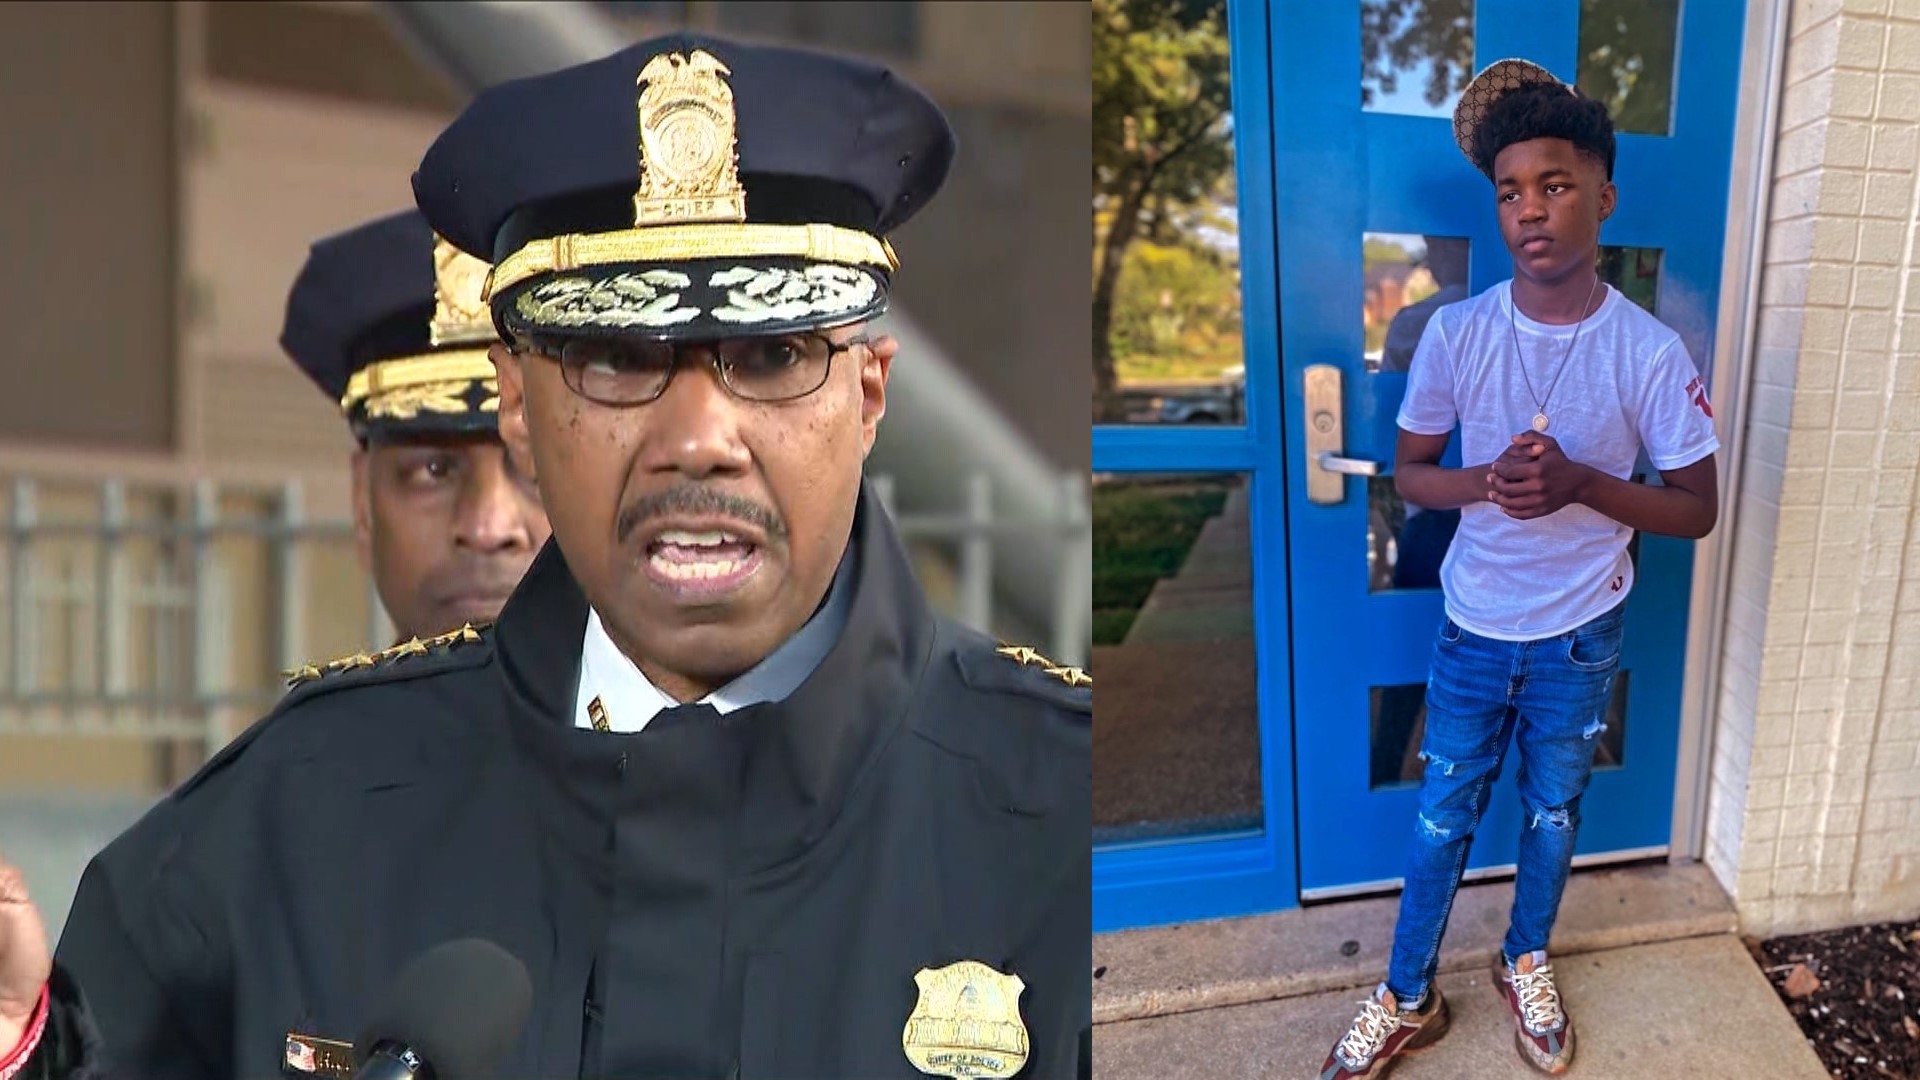 Days after a 13-year-old boy was shot to death in D.C, Chief Contee held a press conference regarding what he calls misinformation surrounding the case.